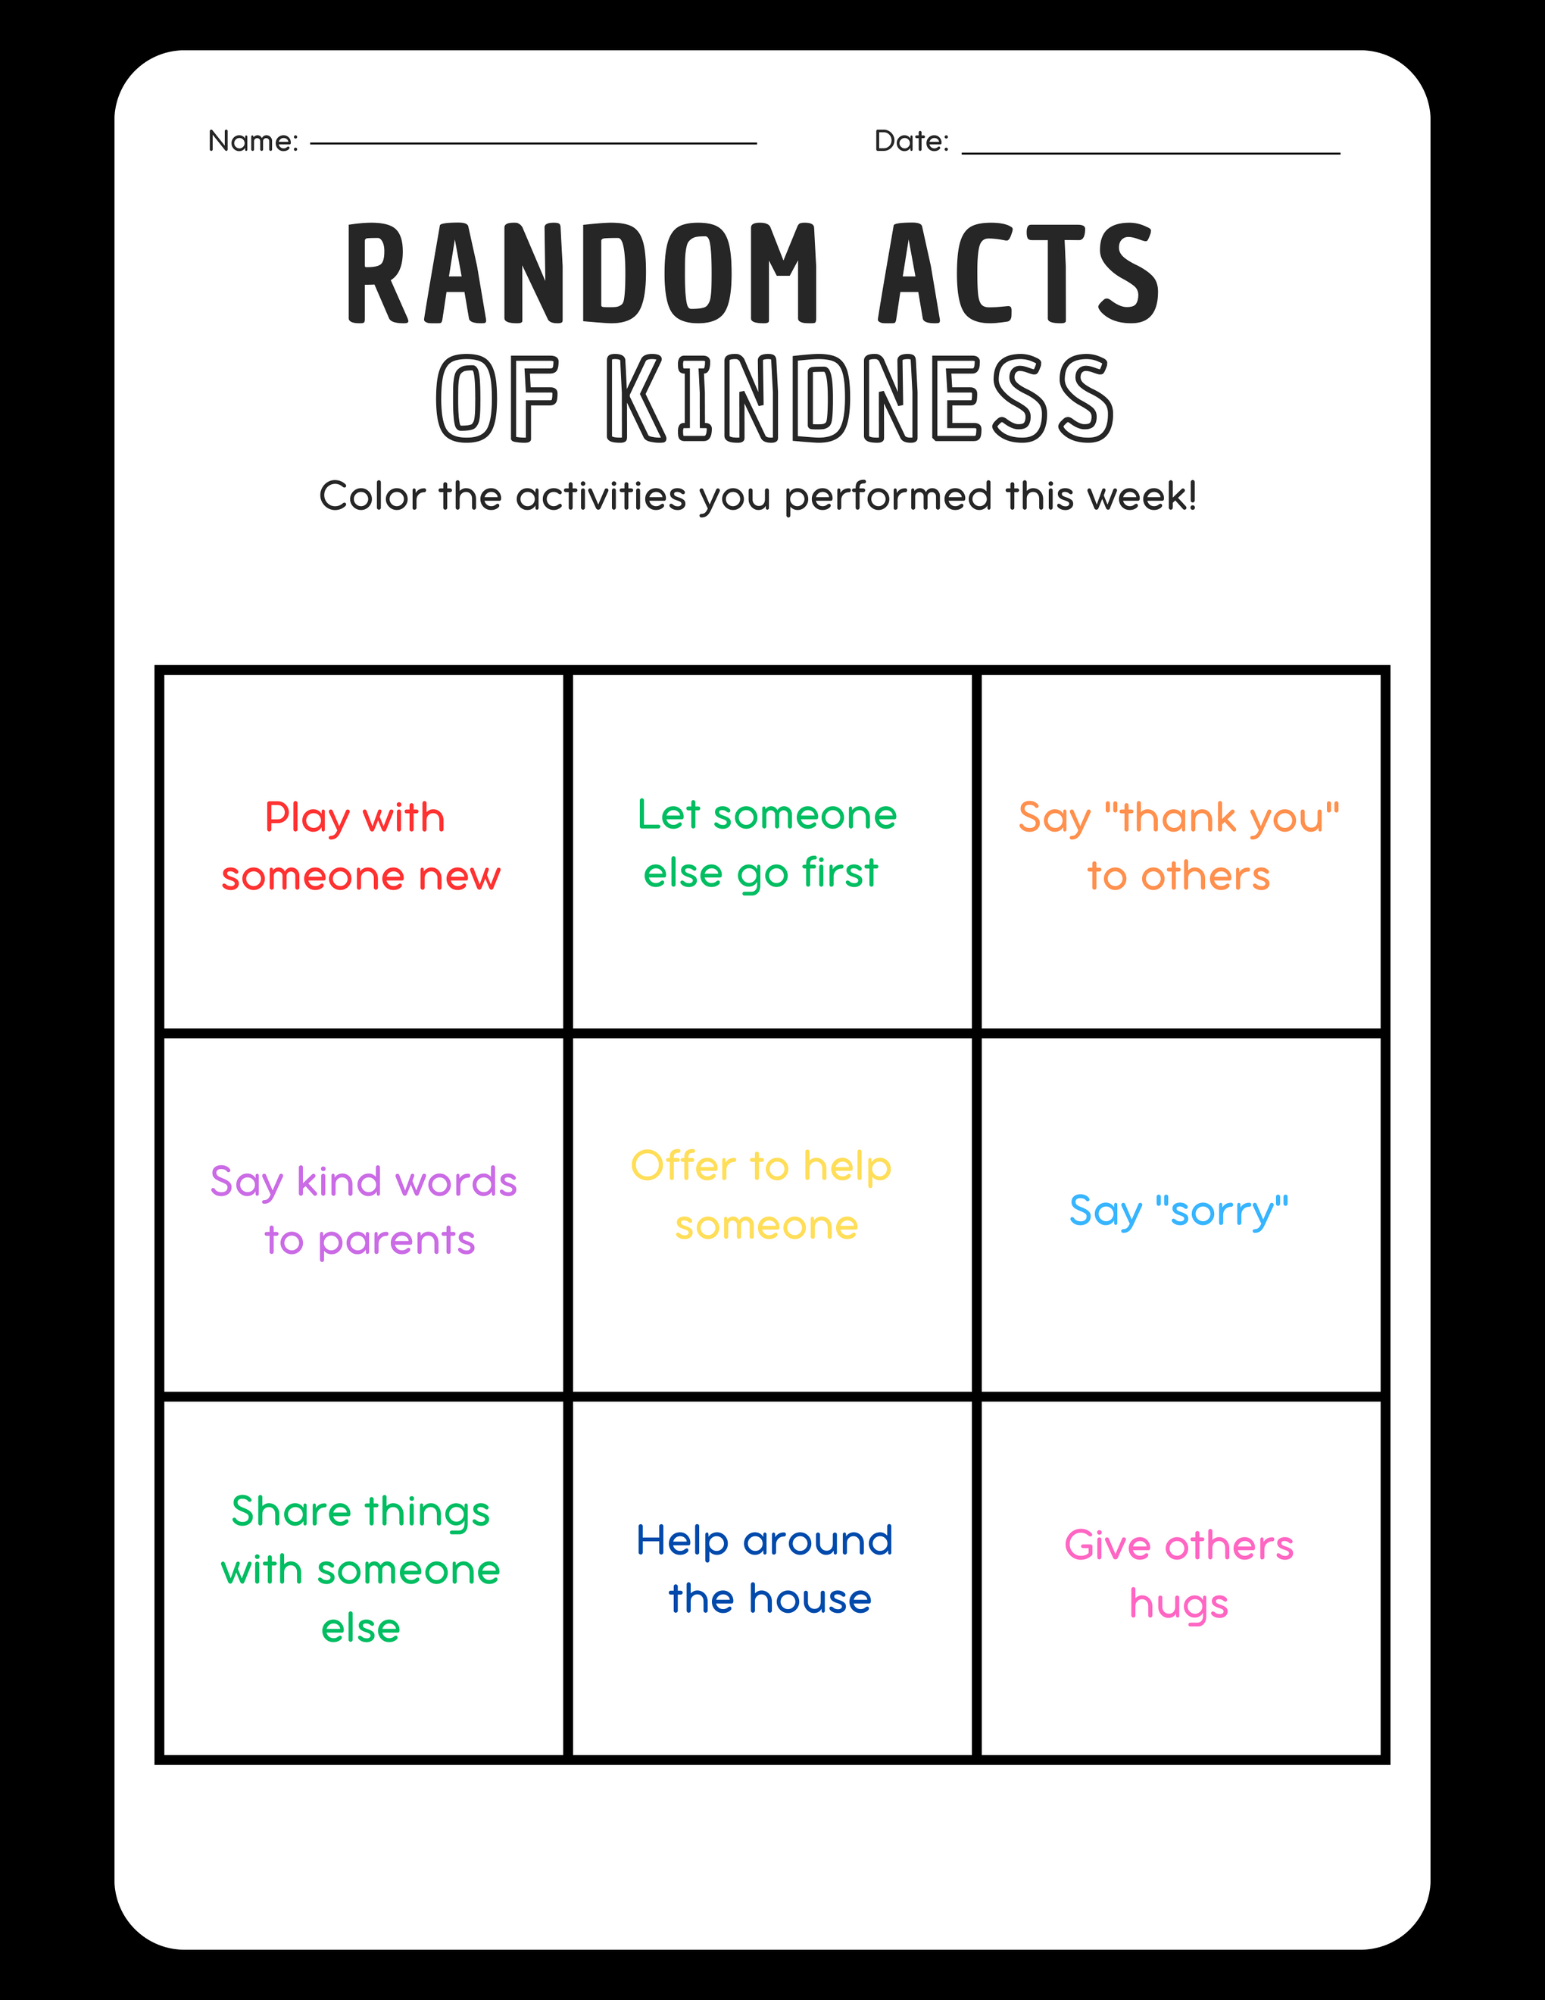 Family Compassion and Kindness Coloring Workbook random acts of kindness page